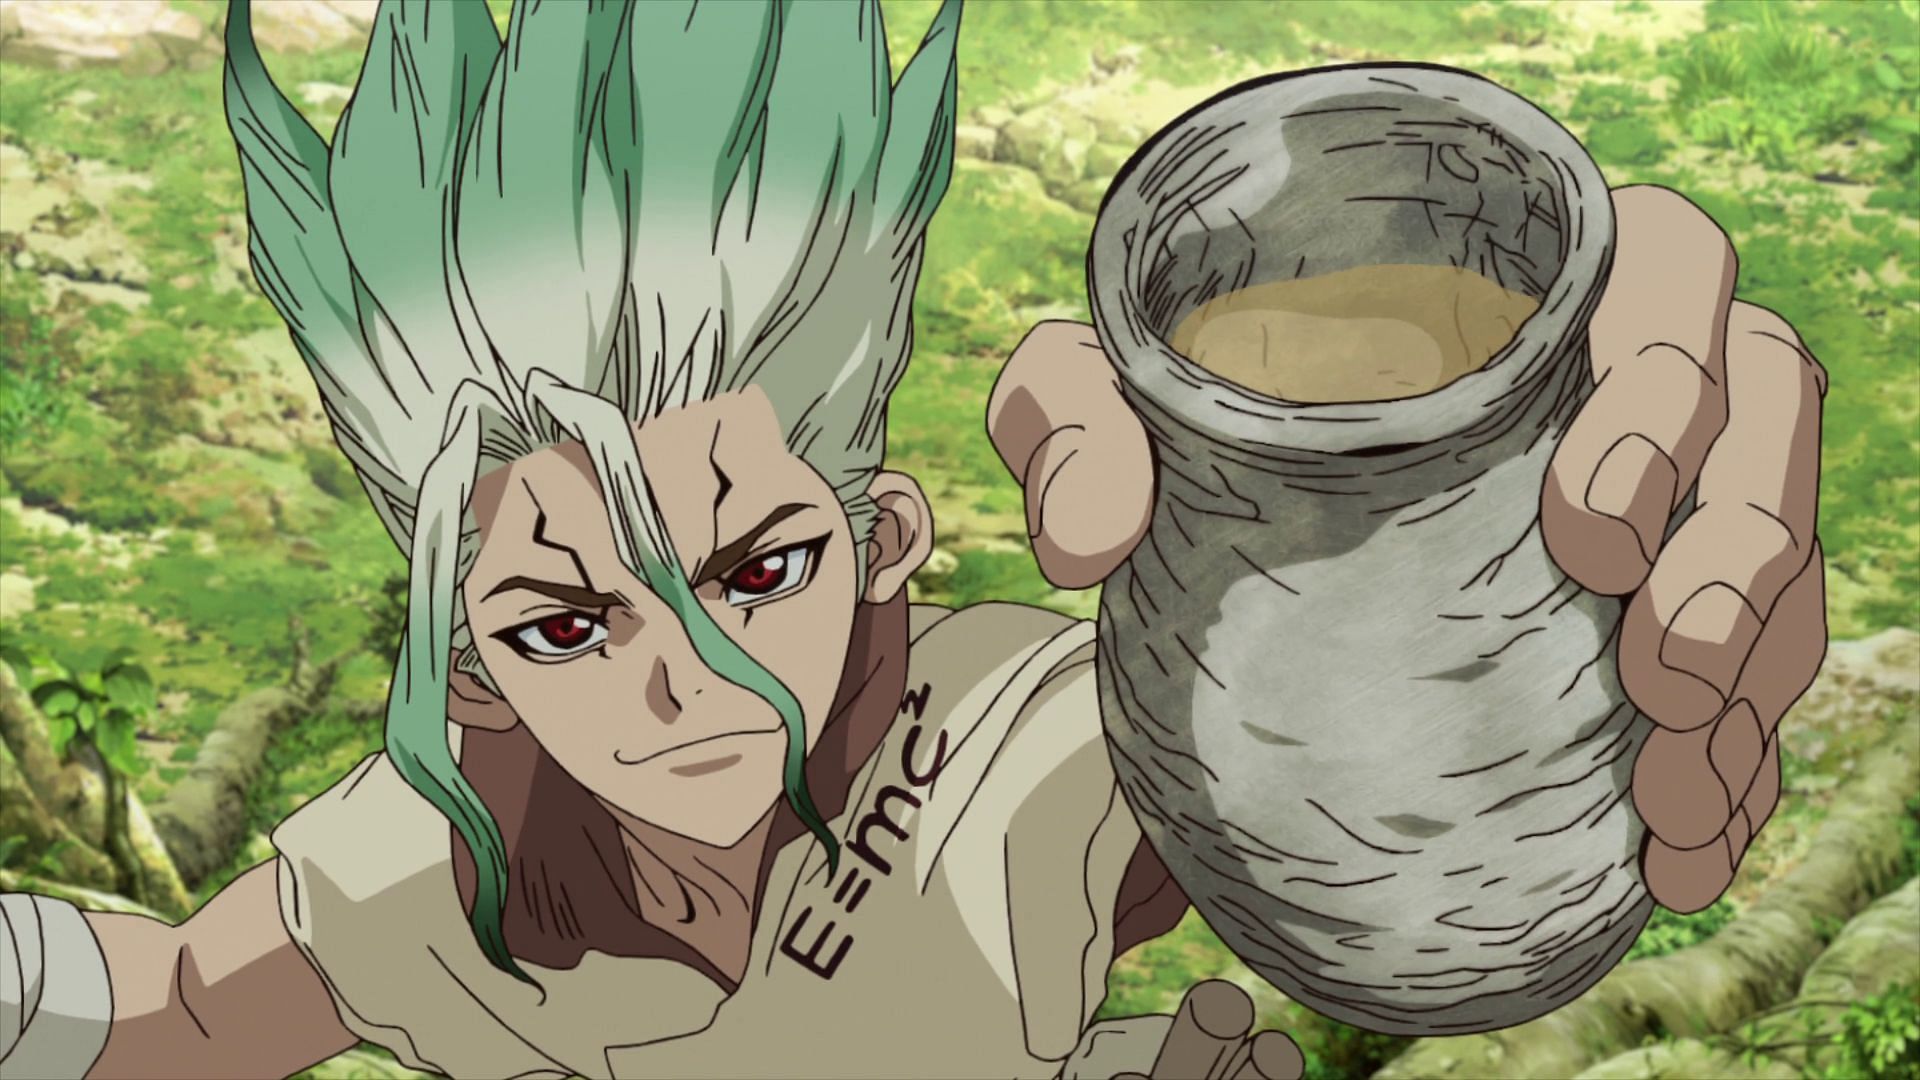 Dr. Stone Season 3 Part 2 Episode 18 Will Likely Focus on Ibara's Struggles